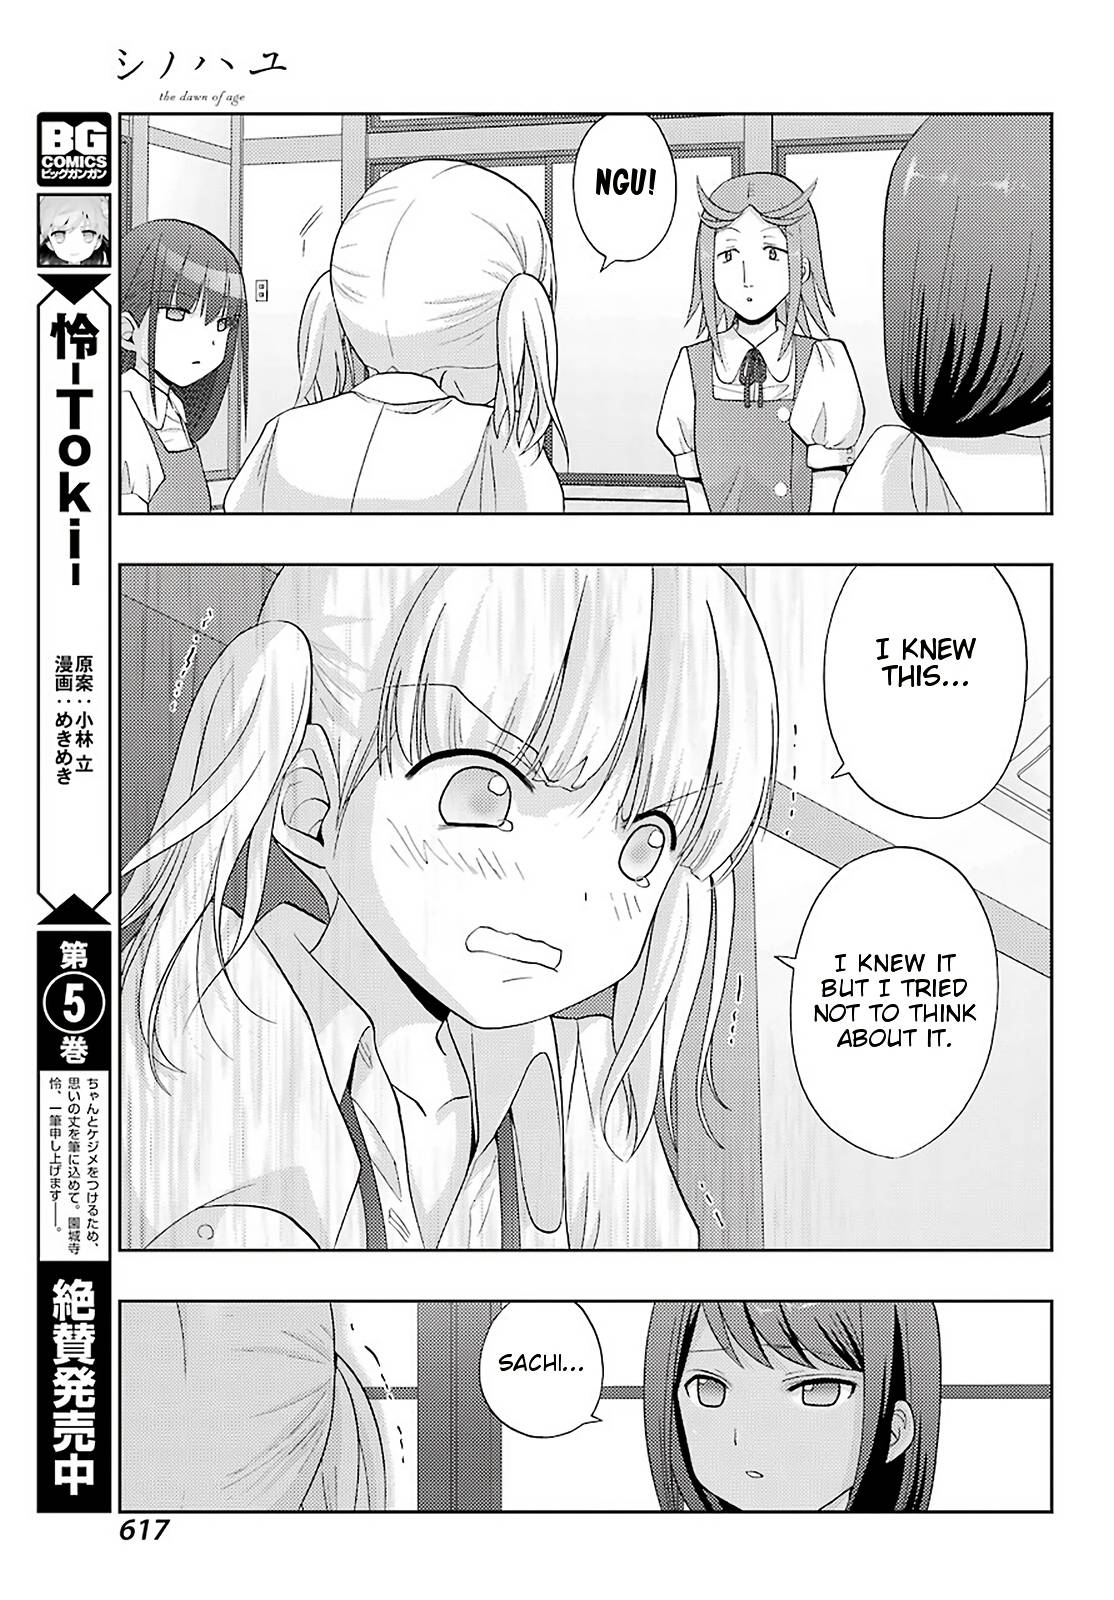 Side Story of - Saki - Shinohayu The Dawn of Age - chapter 76 - #3